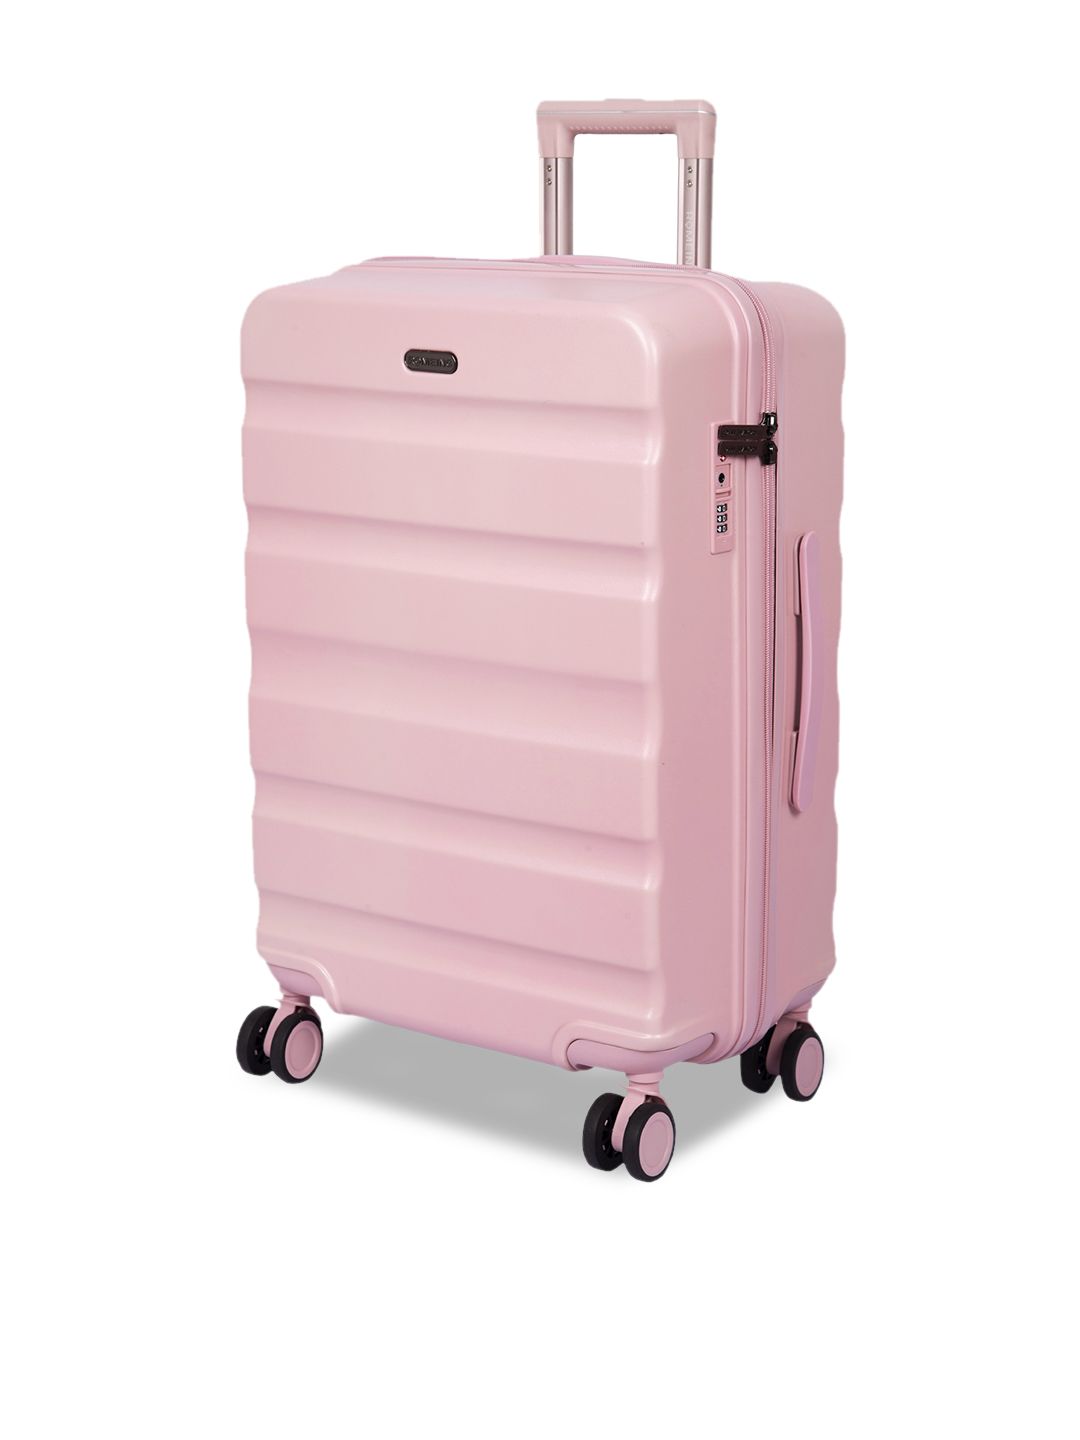 ROMEING Venice Pink Textured Hard Sided Polycarbonate Medium Trolley Suitcase Price in India